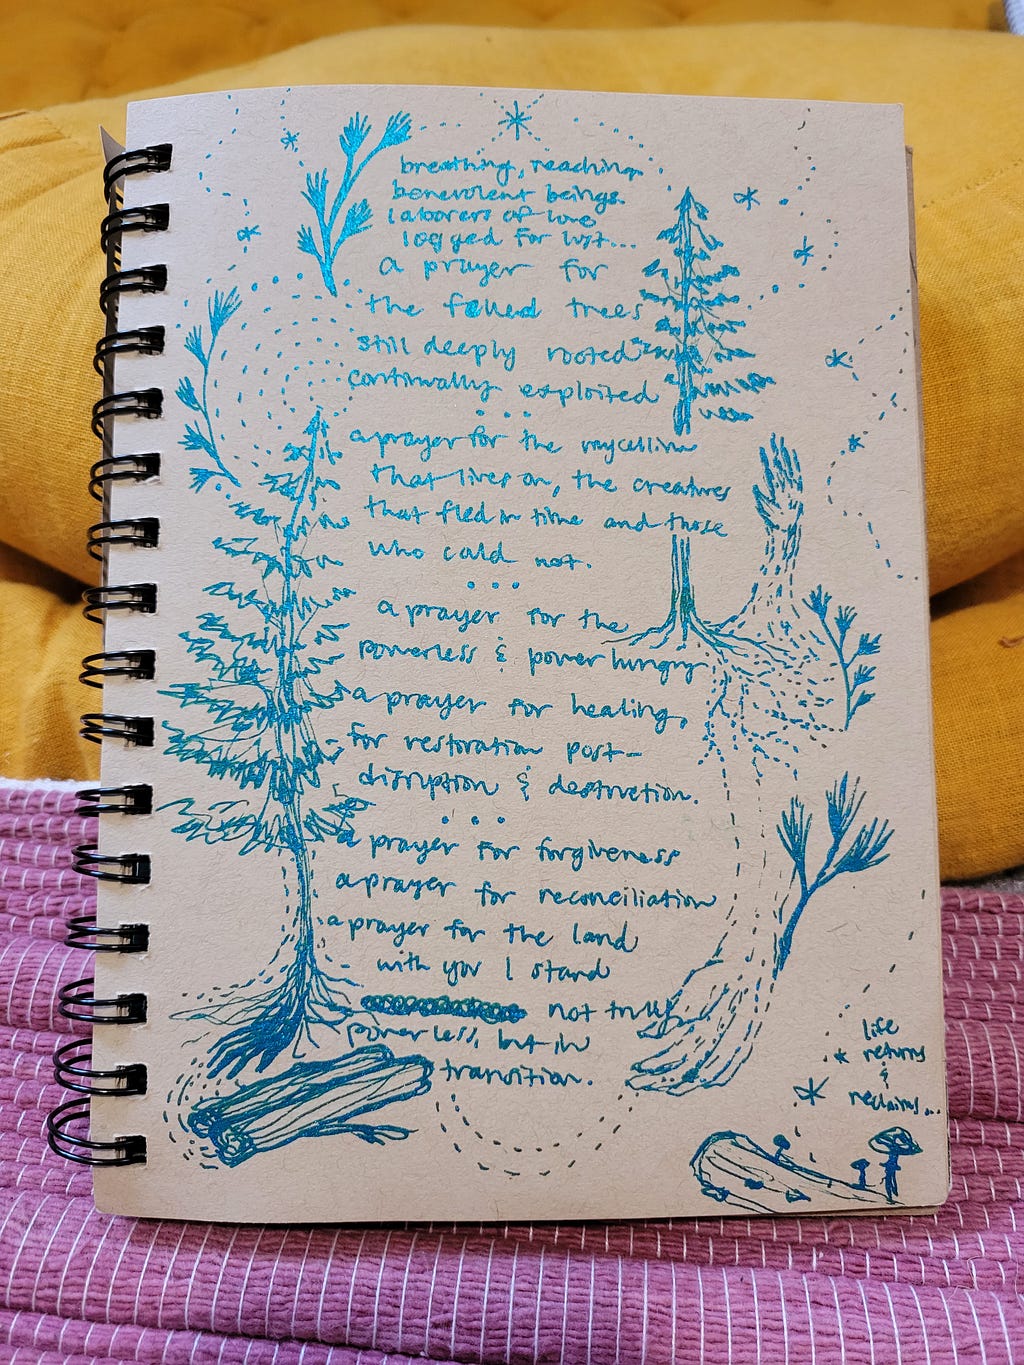 a teal ink drawing on brown kraft paper of trees and roots and logs as hands and branches reaching out for protection, surrounding the prayer written below;